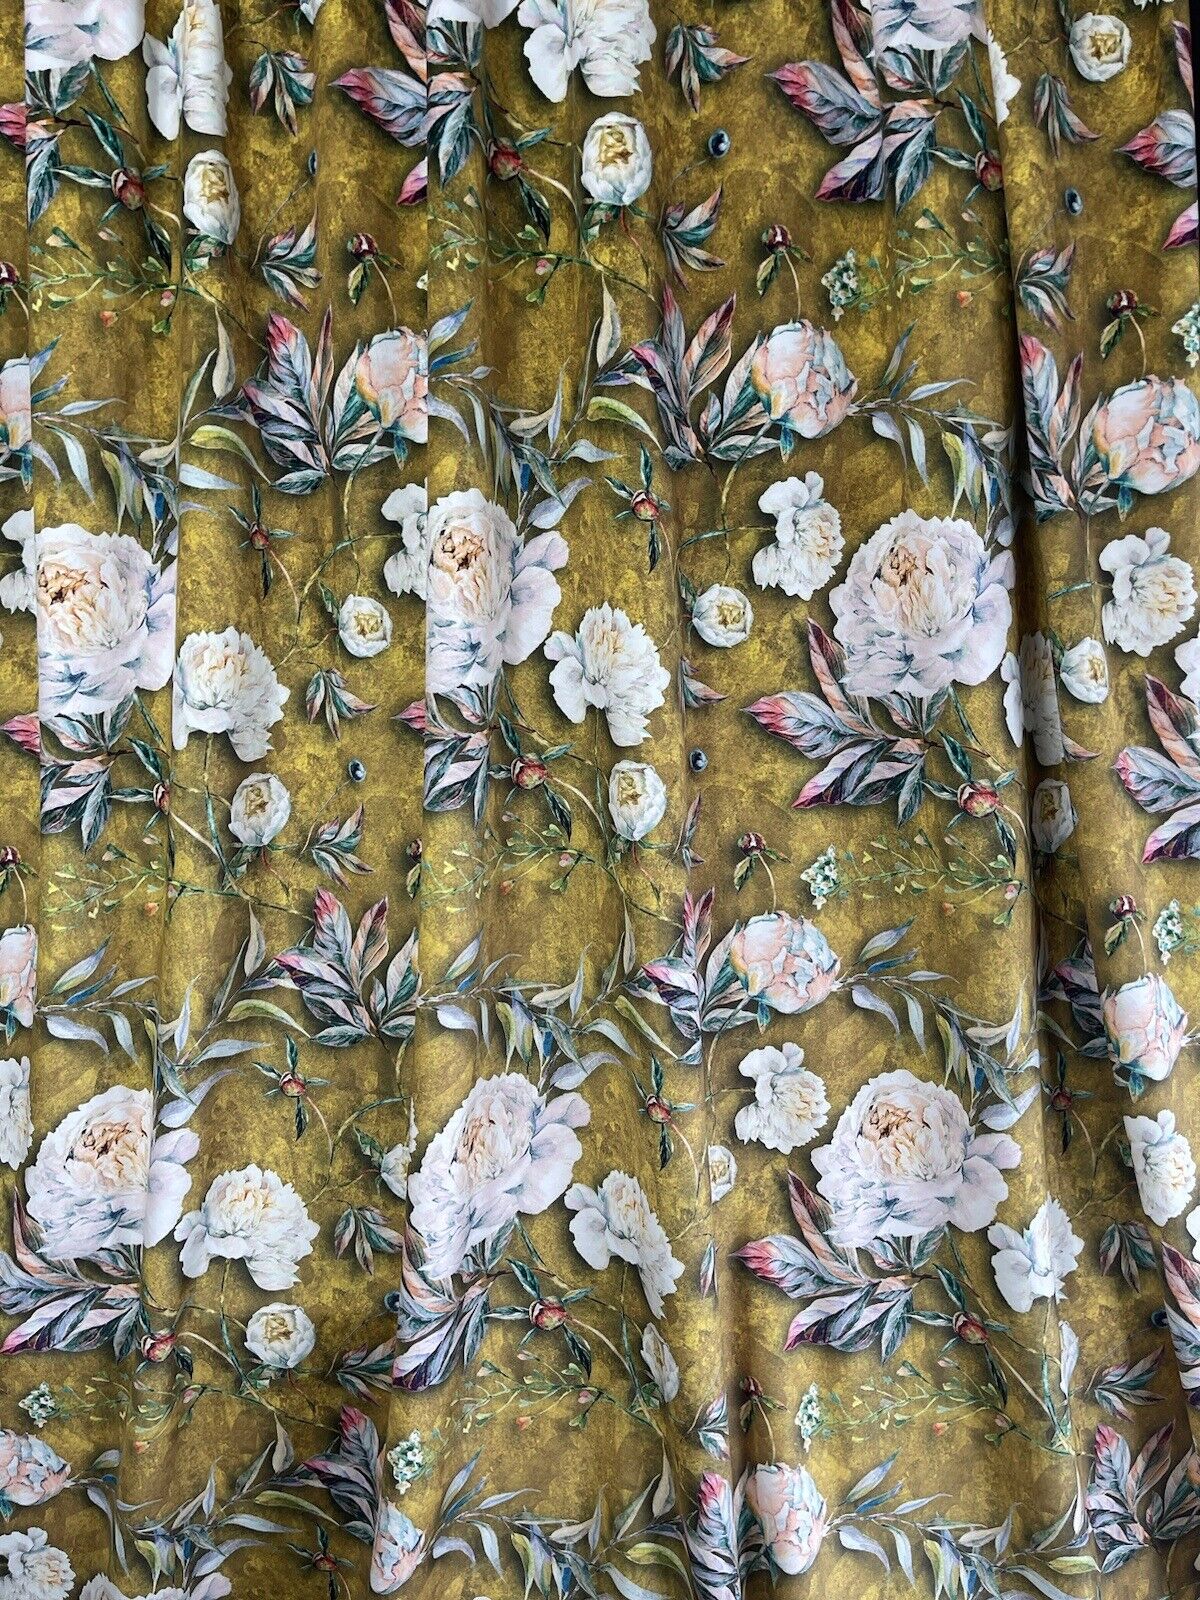 Light Pink Roses in Bloom Printed on Yellow Gold Color Velvet  Fabric Sold by Yard Meter DIY Upholstery Floral Sewing Material By Yards Metros Flowers Curtain Textile